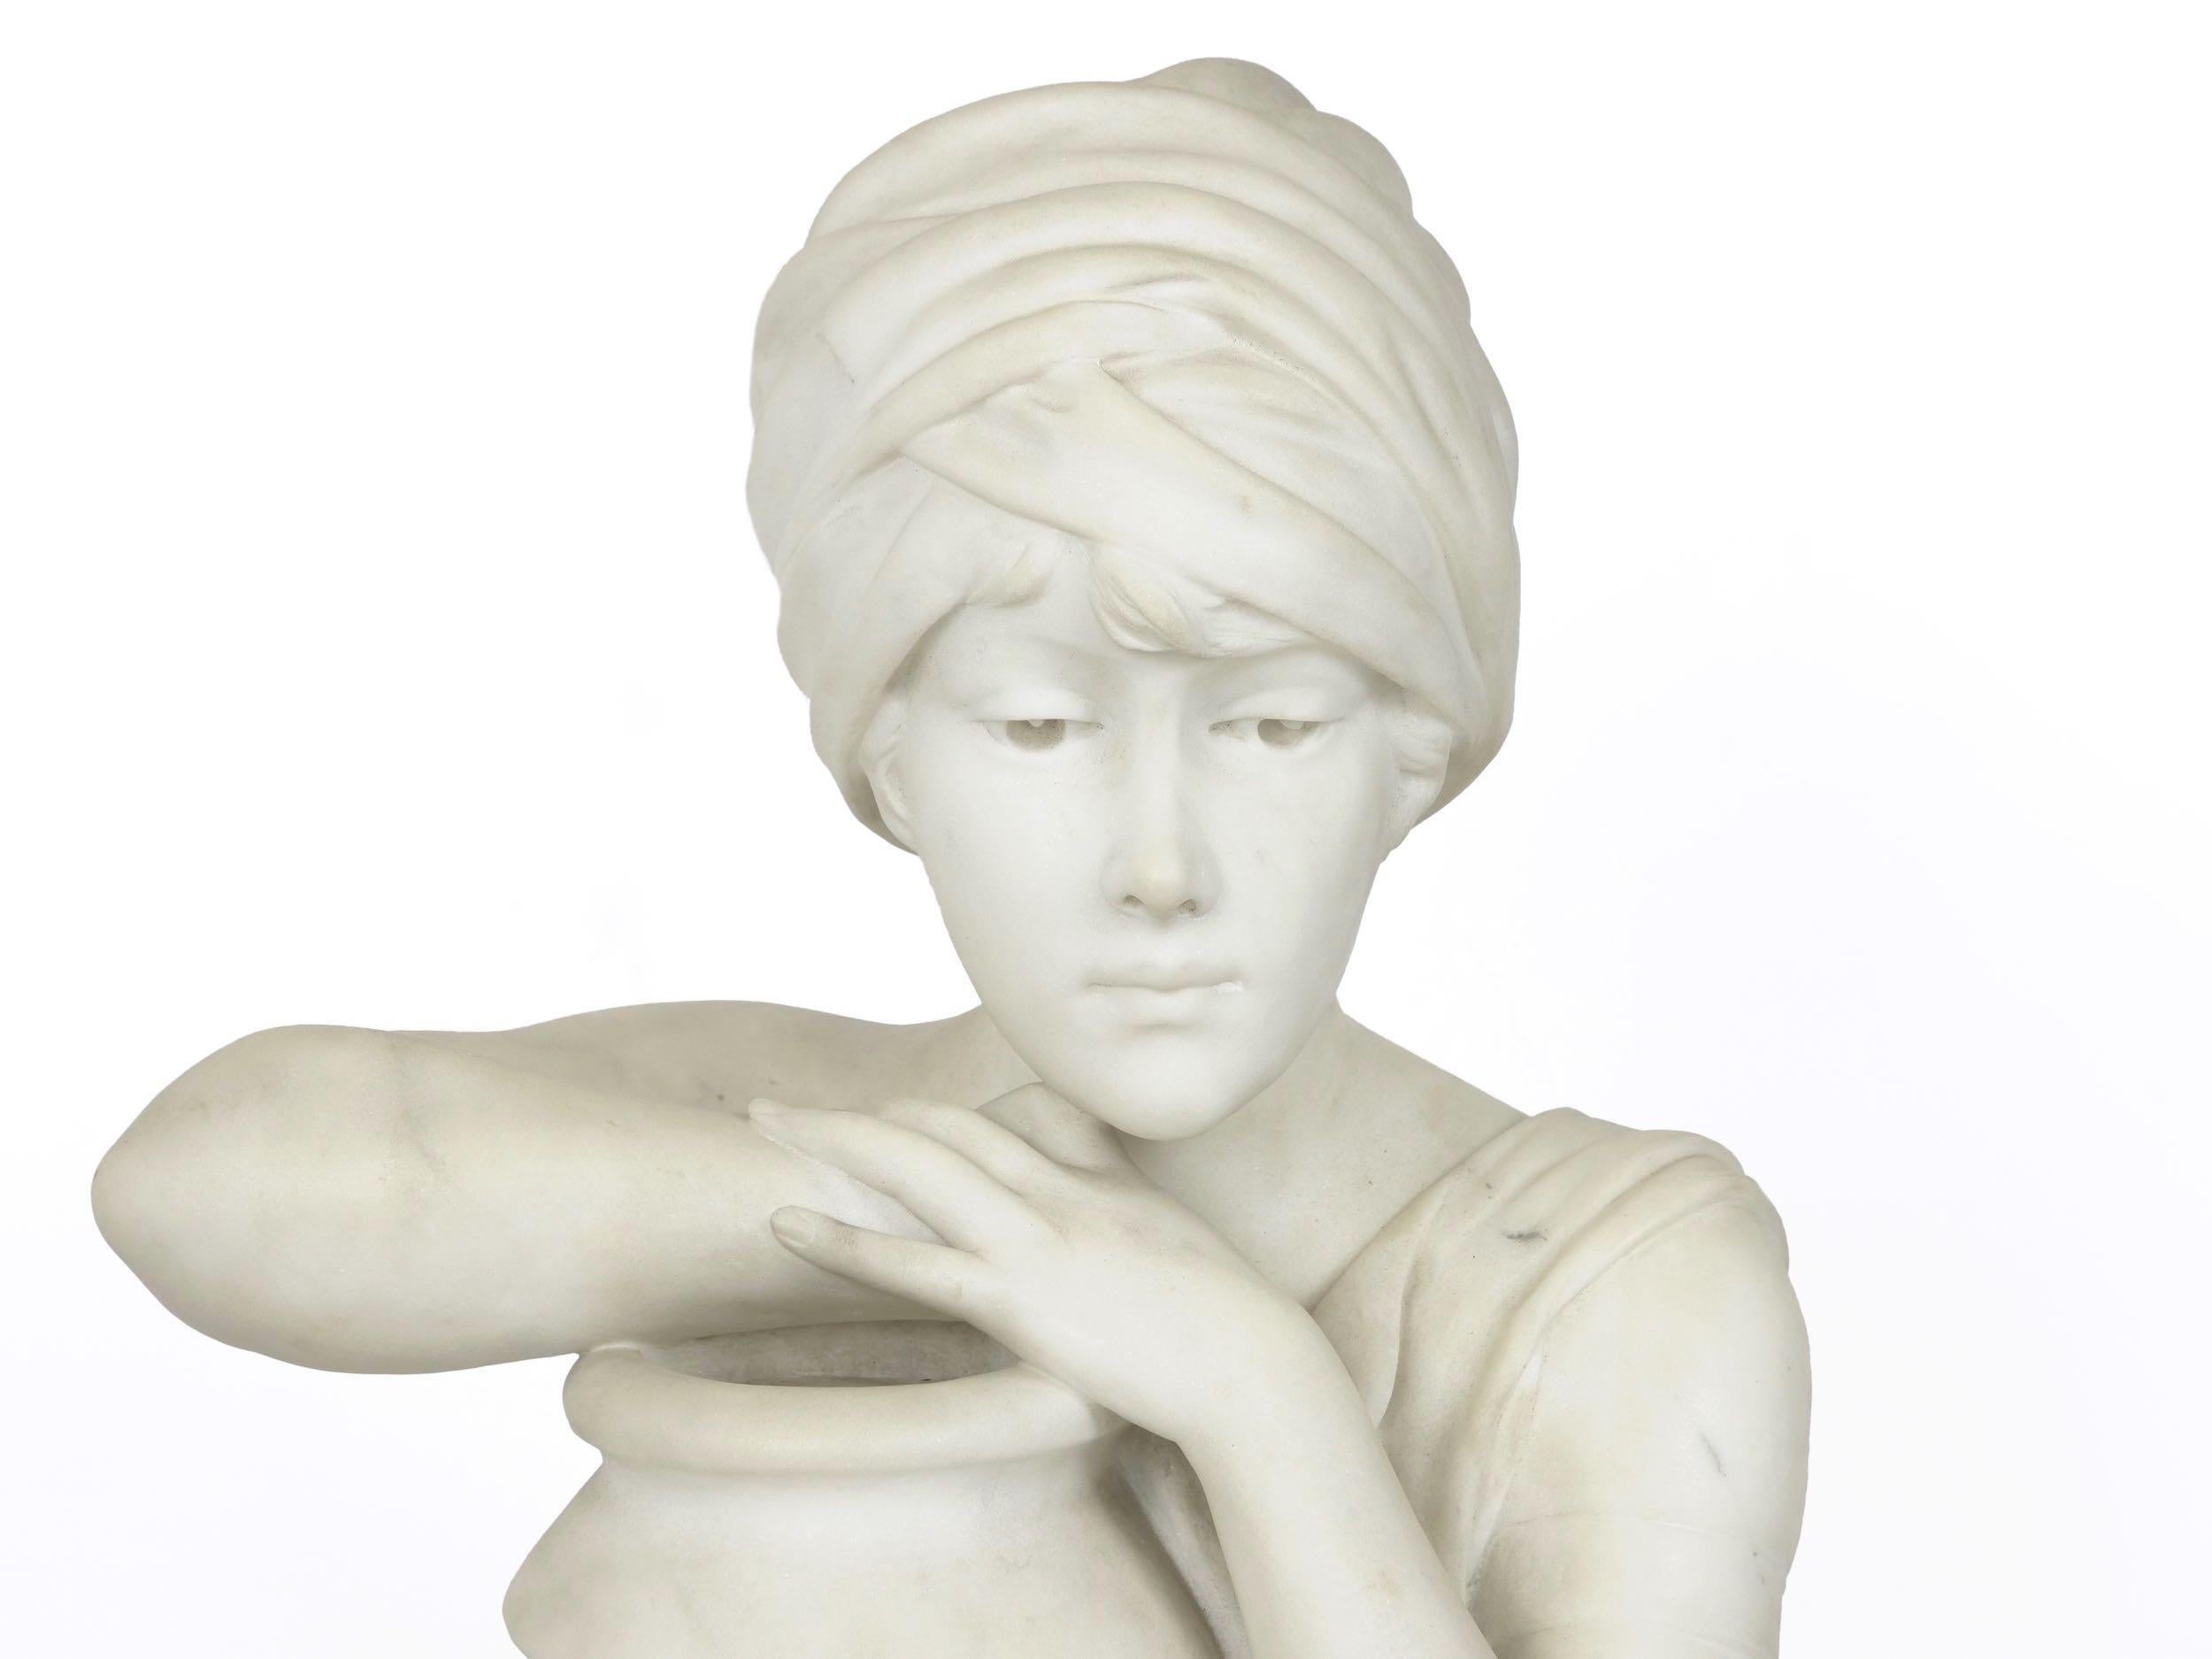 Carrara Marble “Rebecca at the Well” Italian Marble Antique Bust Sculpture by Antonio Piazza